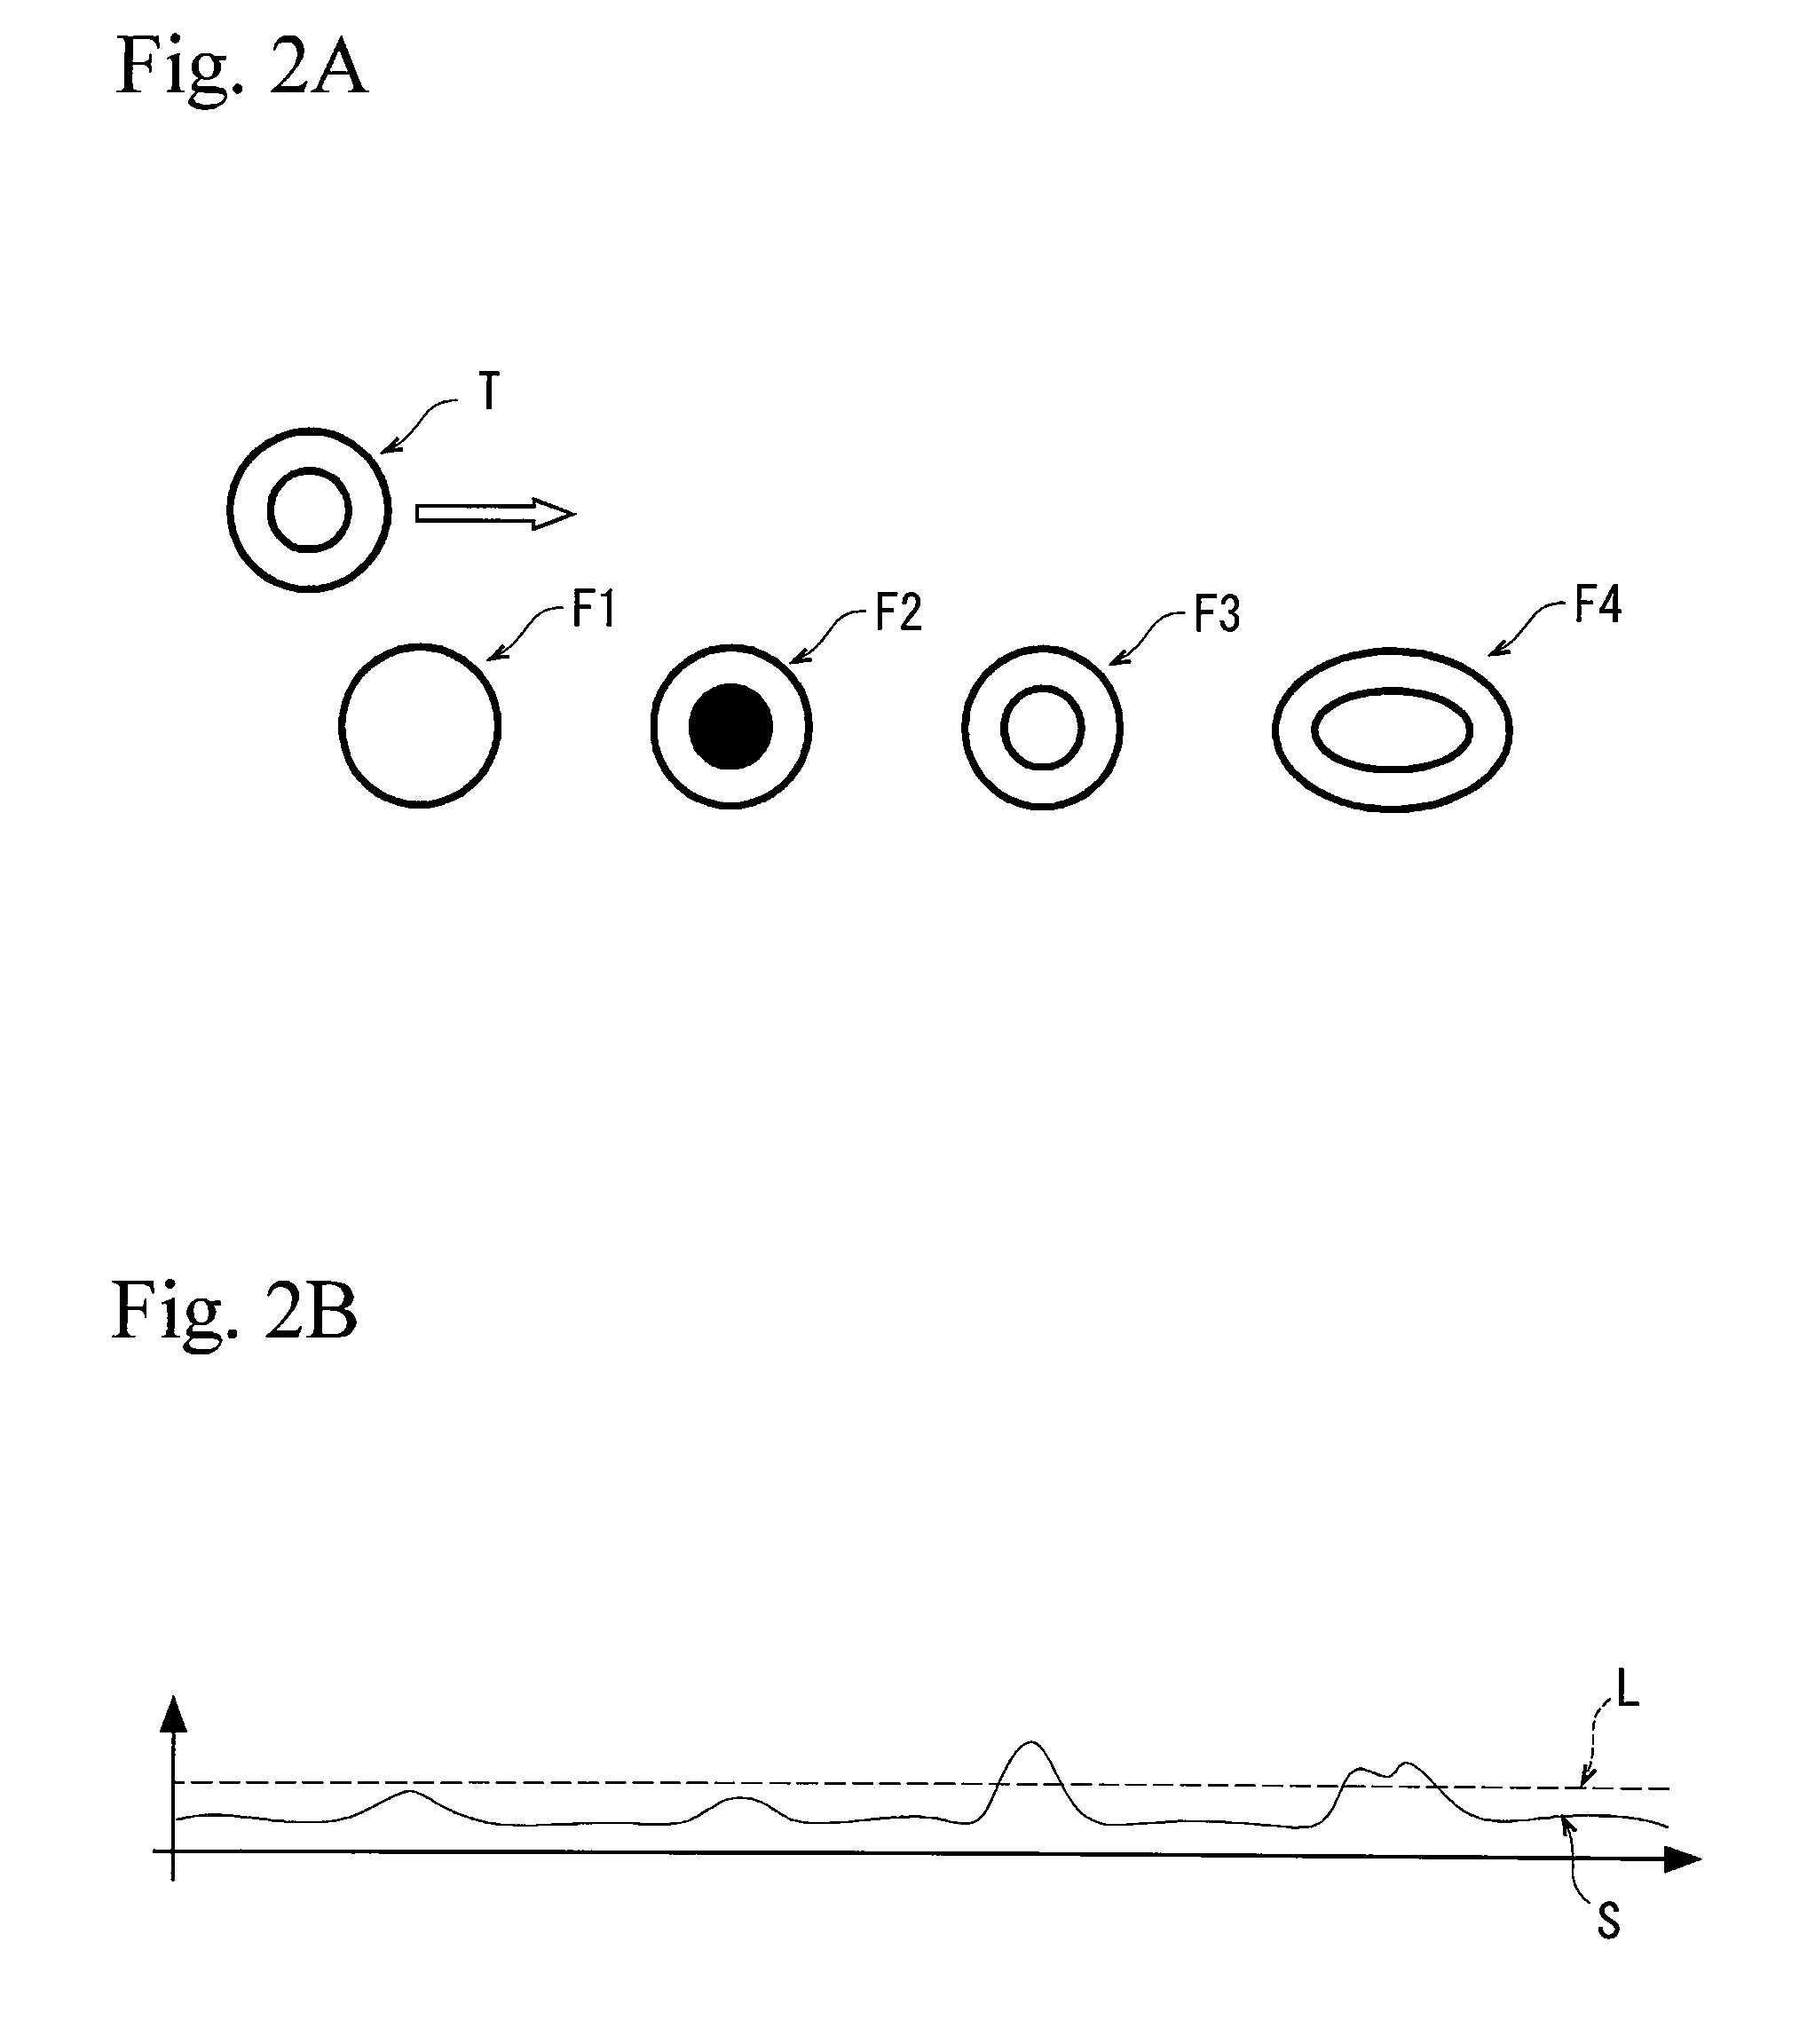 Image recognition device, copy apparatus and image recognition method